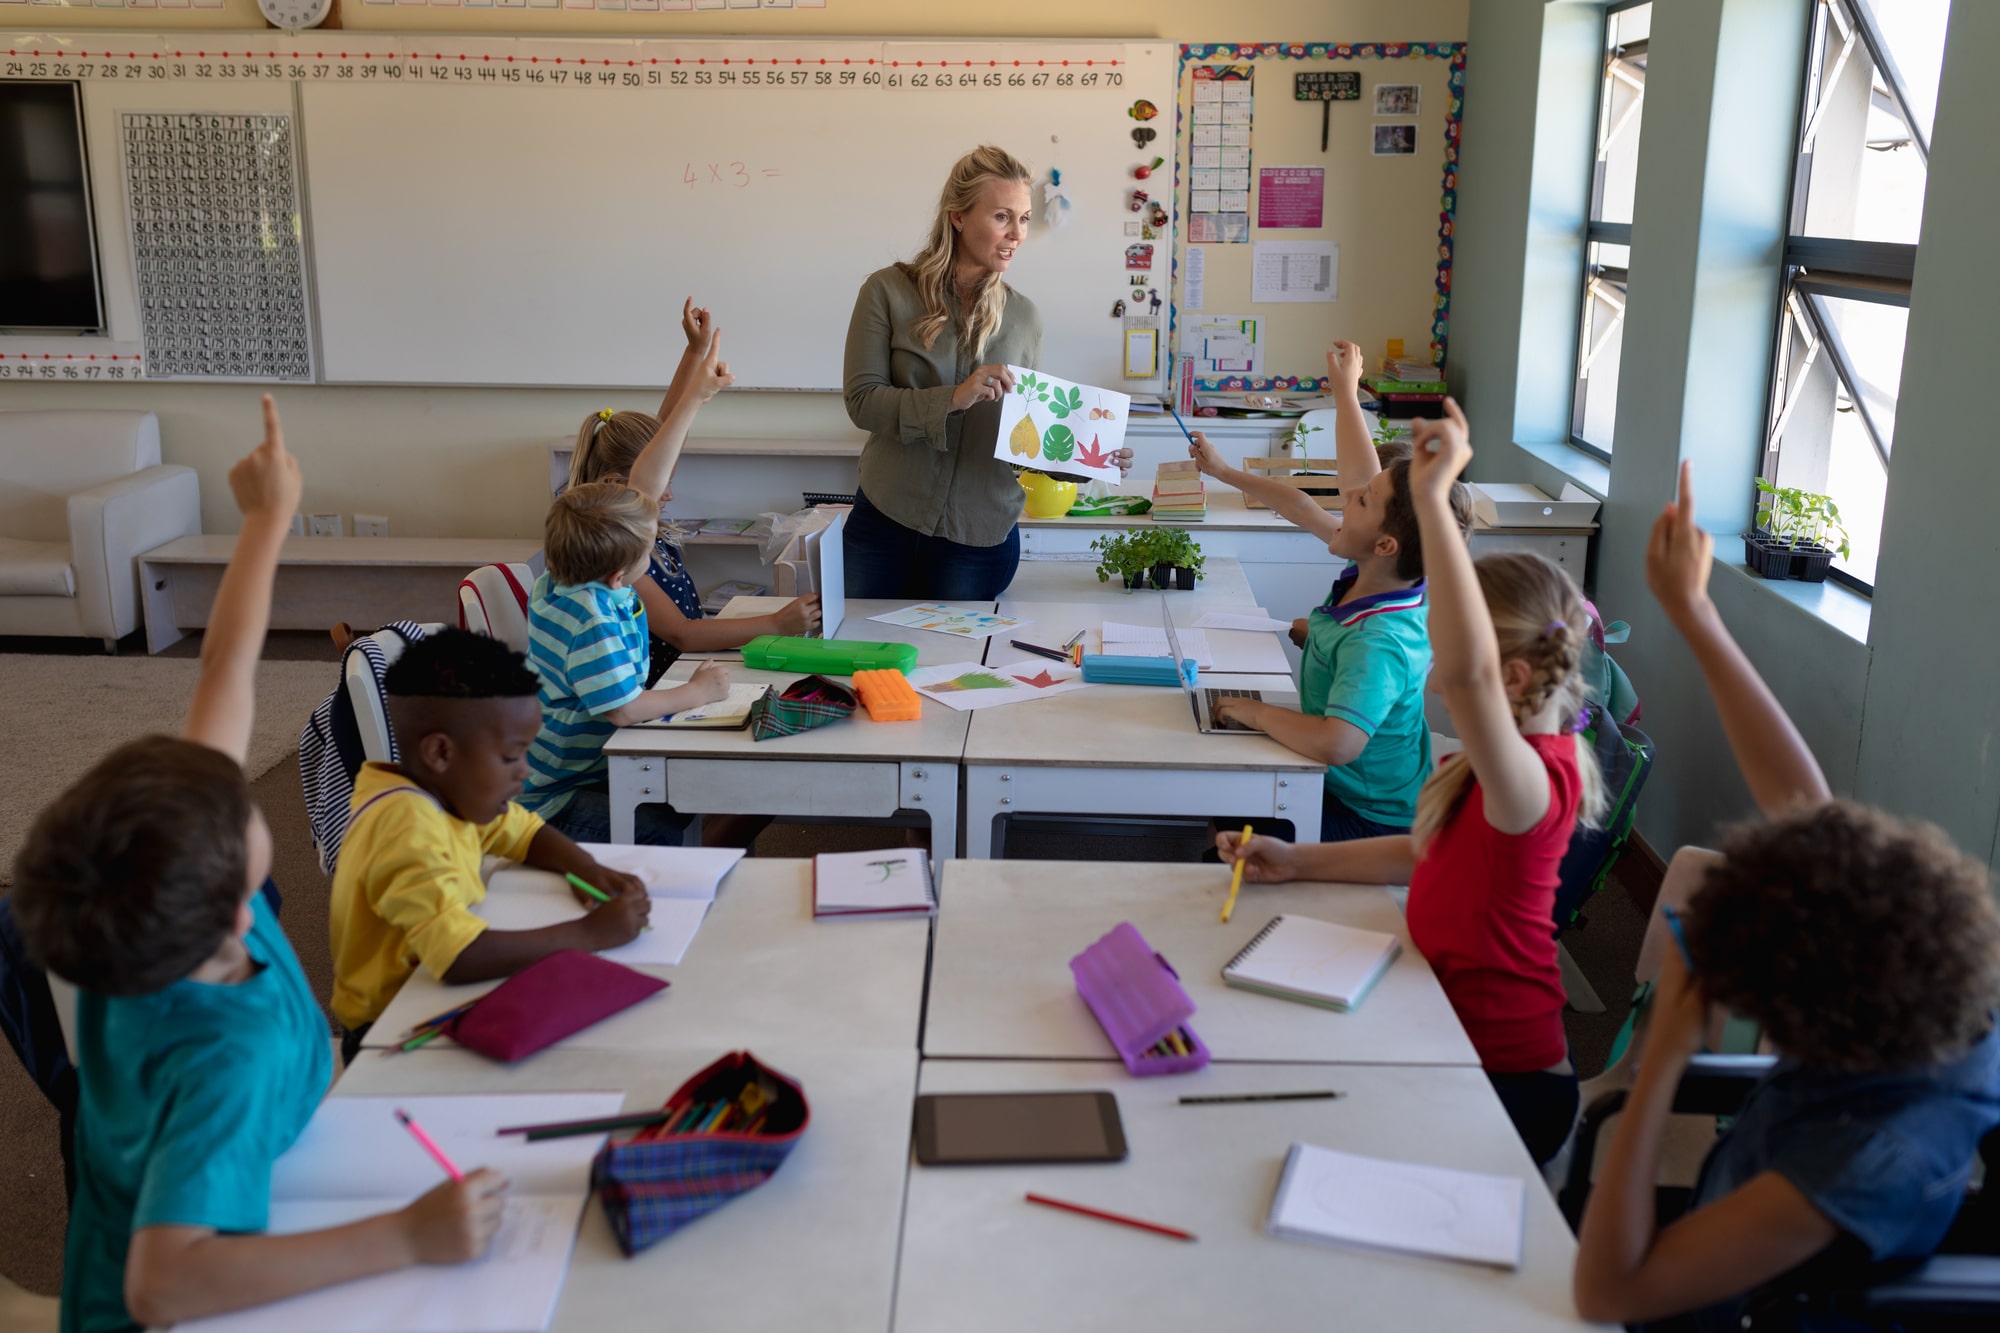 High angle view of a Caucasian female teacher with long blonde hair holding a picture of leaves and a diverse group of schoolchildren sitting at desks looking and raising their hands, during a lesson in an elementary school classroom